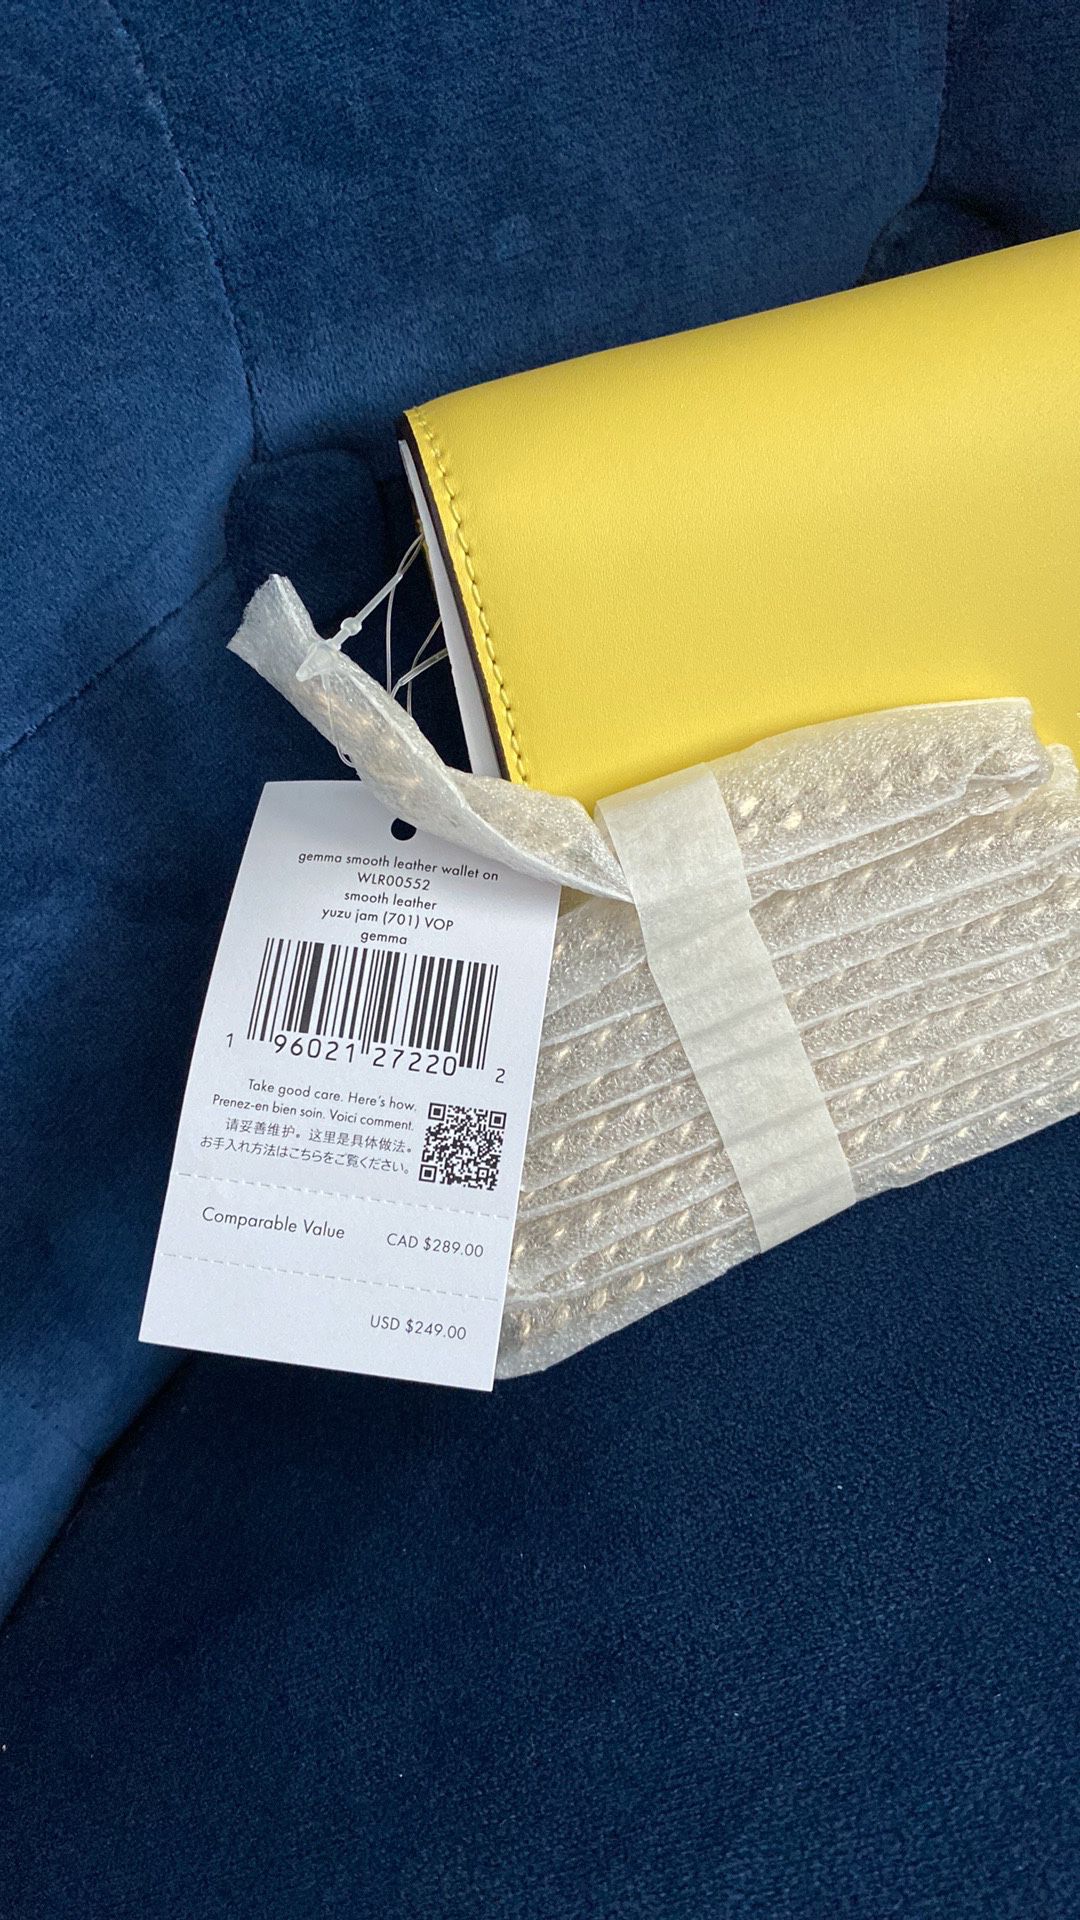 Kate Spade Yellow Crossbody Bag for Sale in Tampa, FL - OfferUp